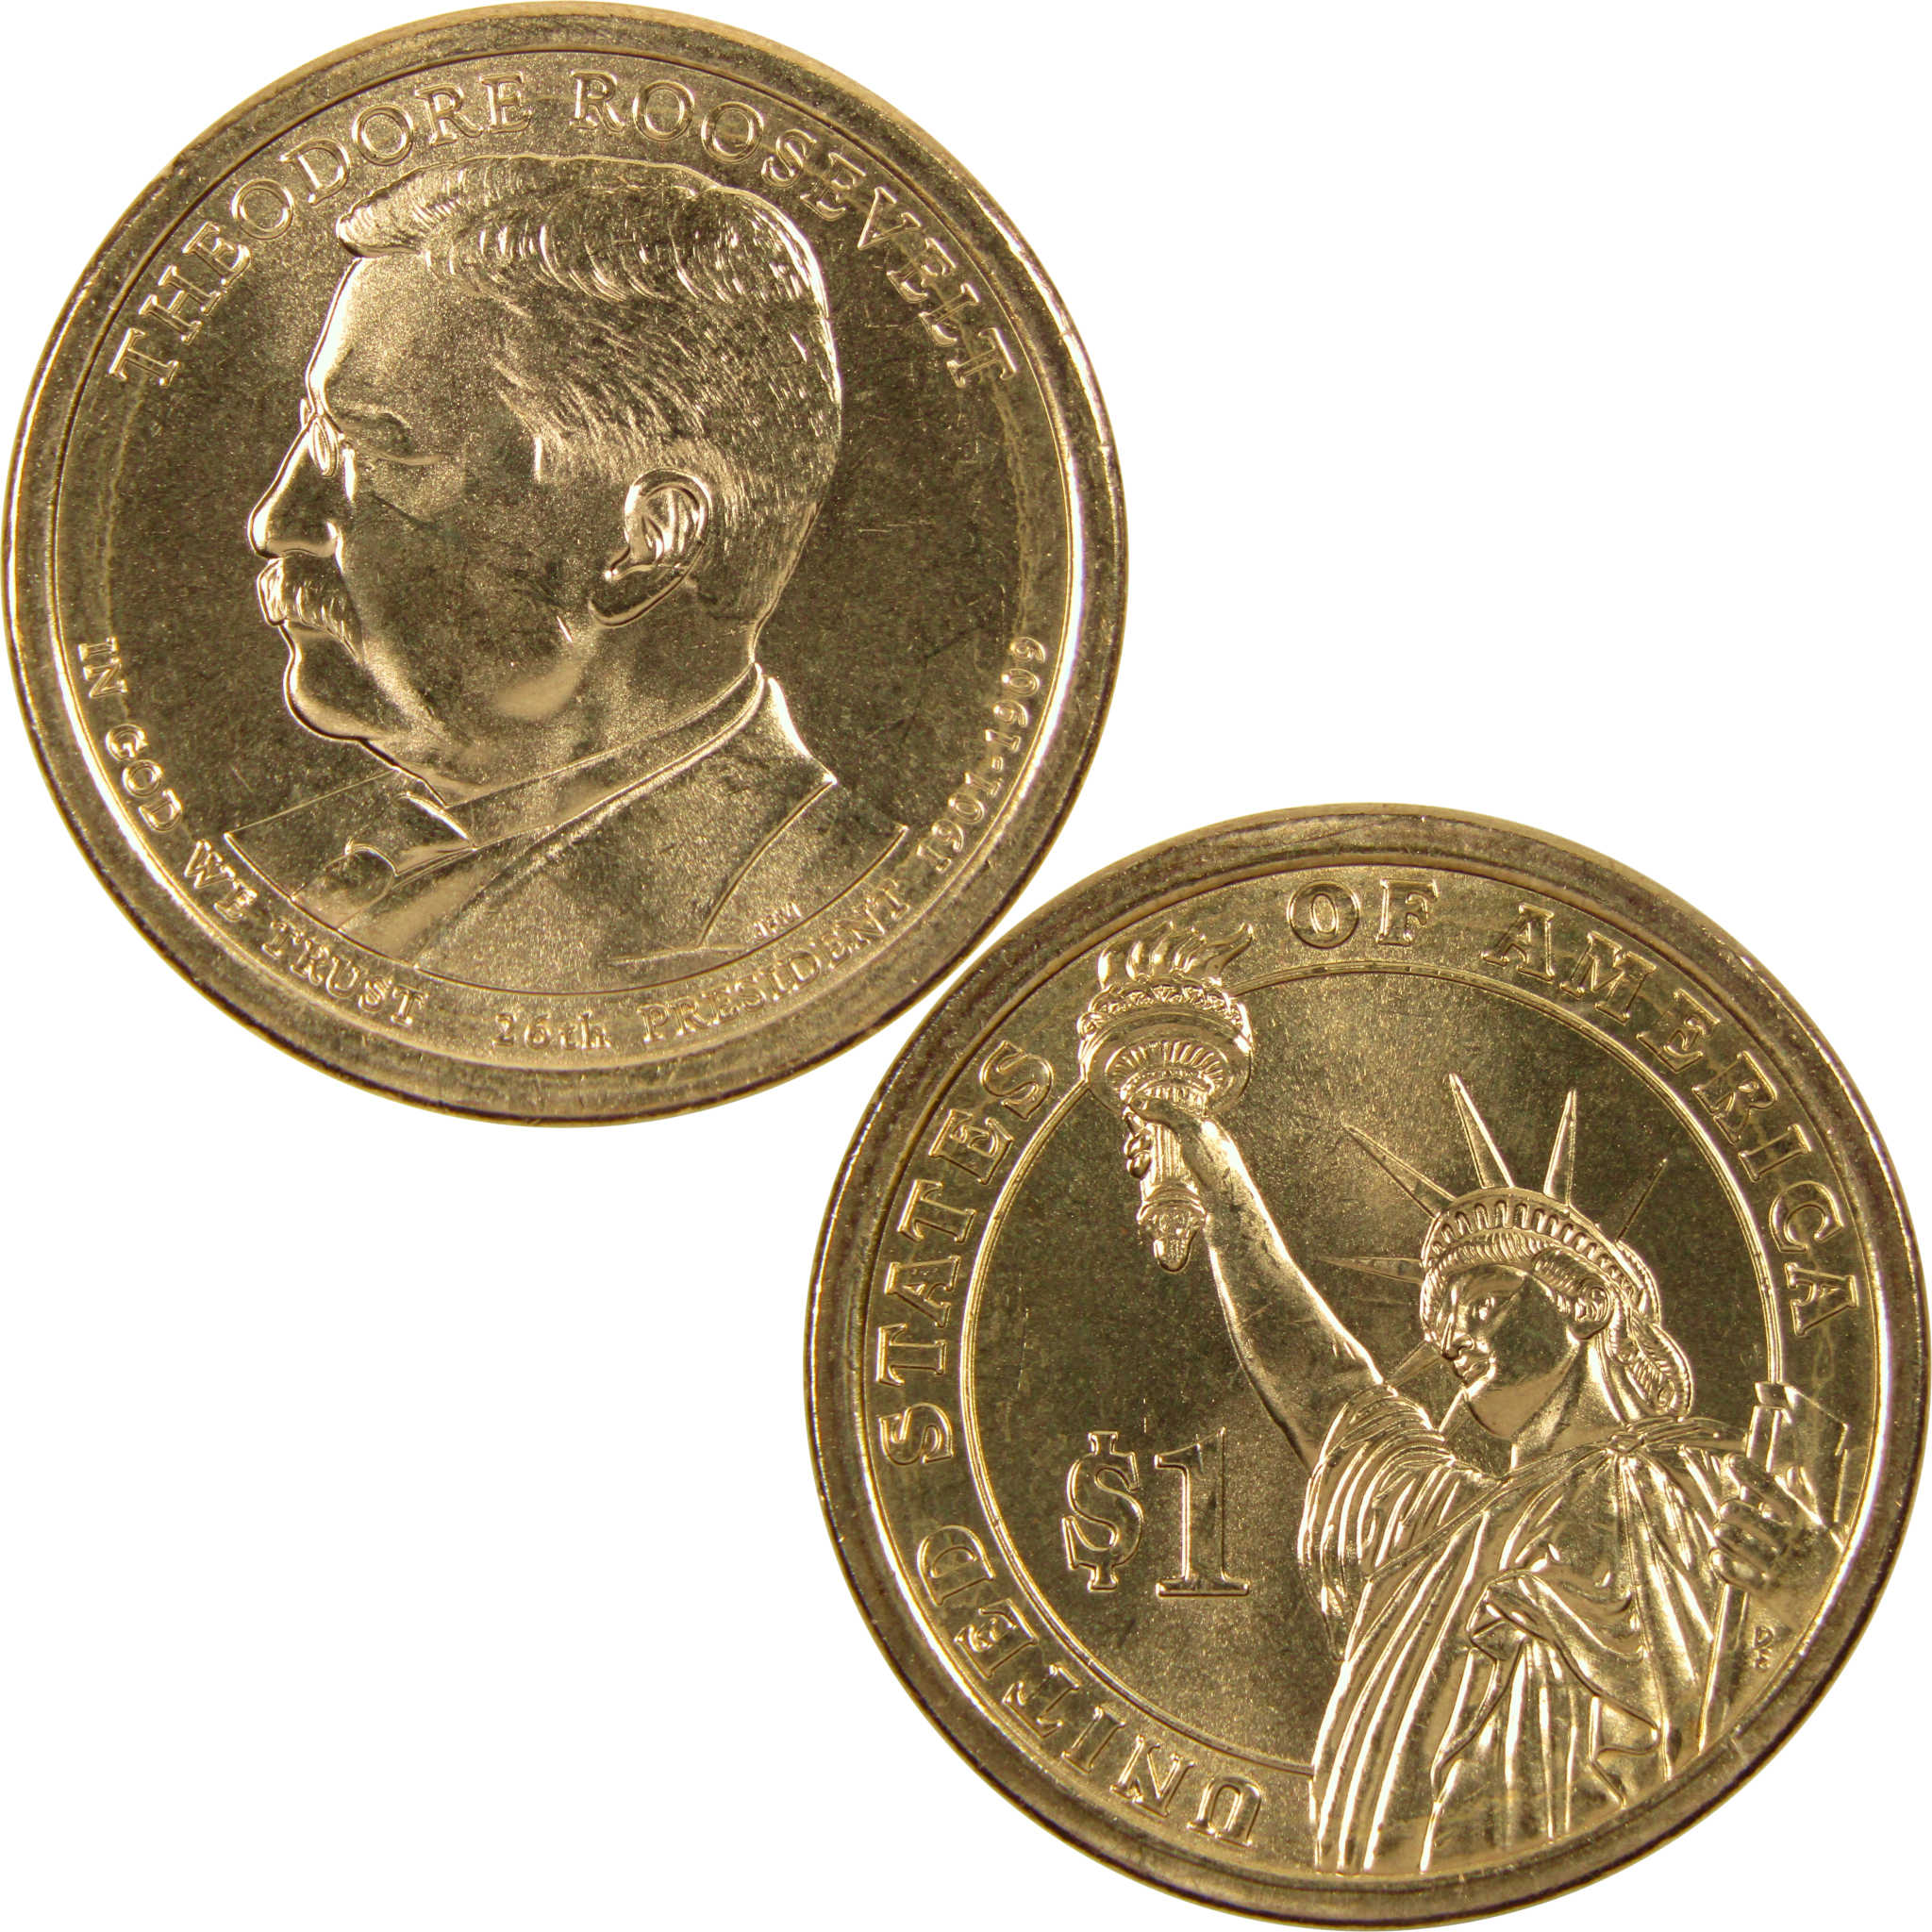 2013 D Theodore Roosevelt Presidential Dollar BU Uncirculated $1 Coin